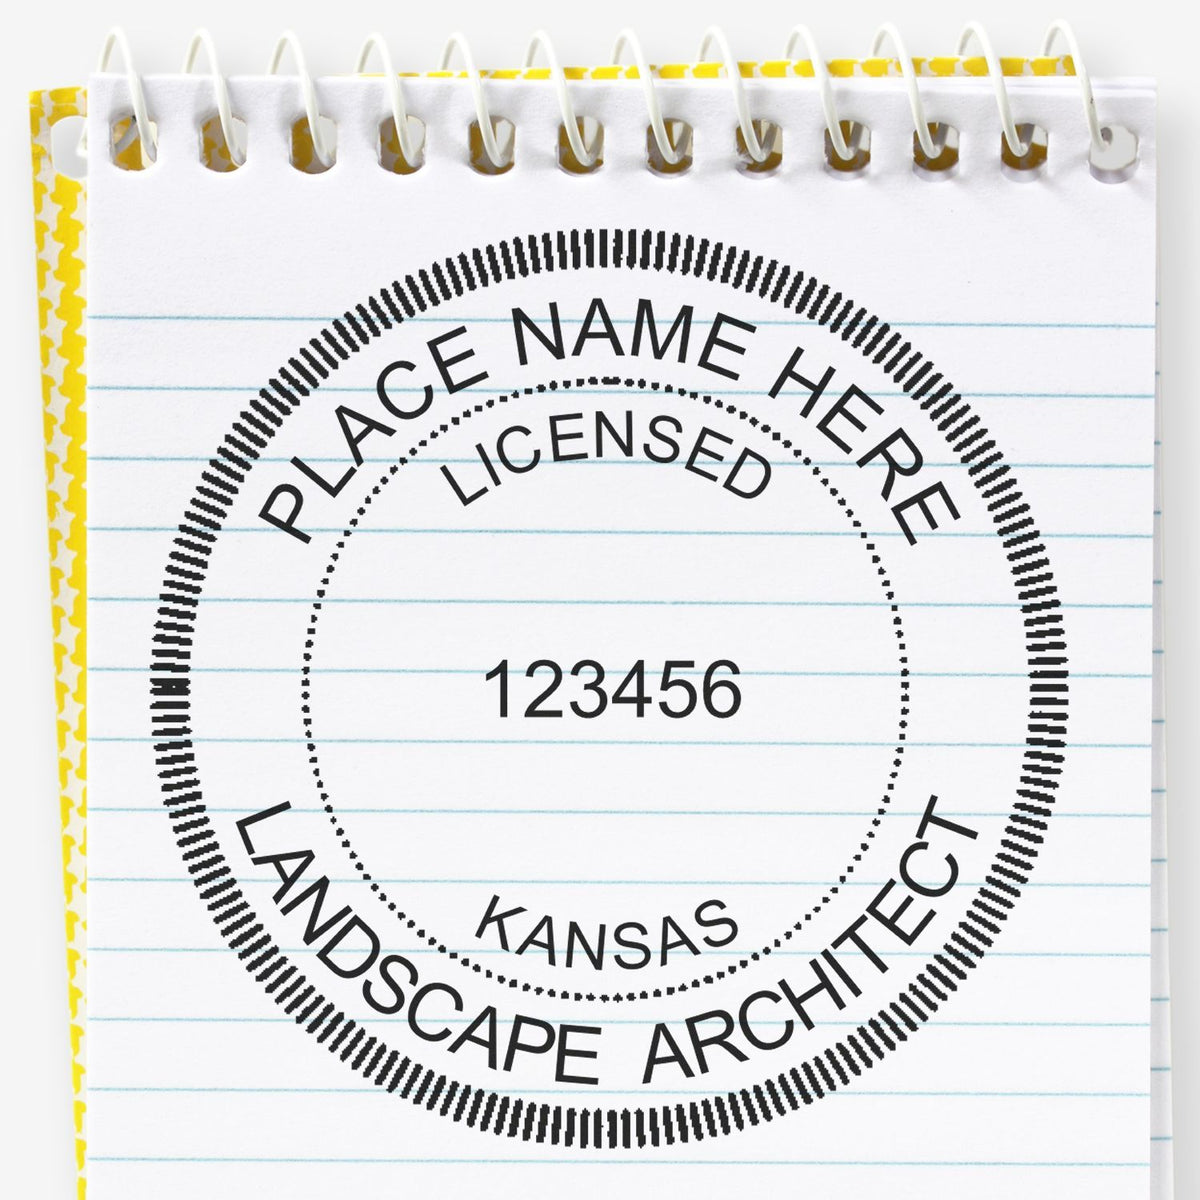 Slim Pre-Inked Kansas Landscape Architect Seal Stamp in use photo showing a stamped imprint of the Slim Pre-Inked Kansas Landscape Architect Seal Stamp